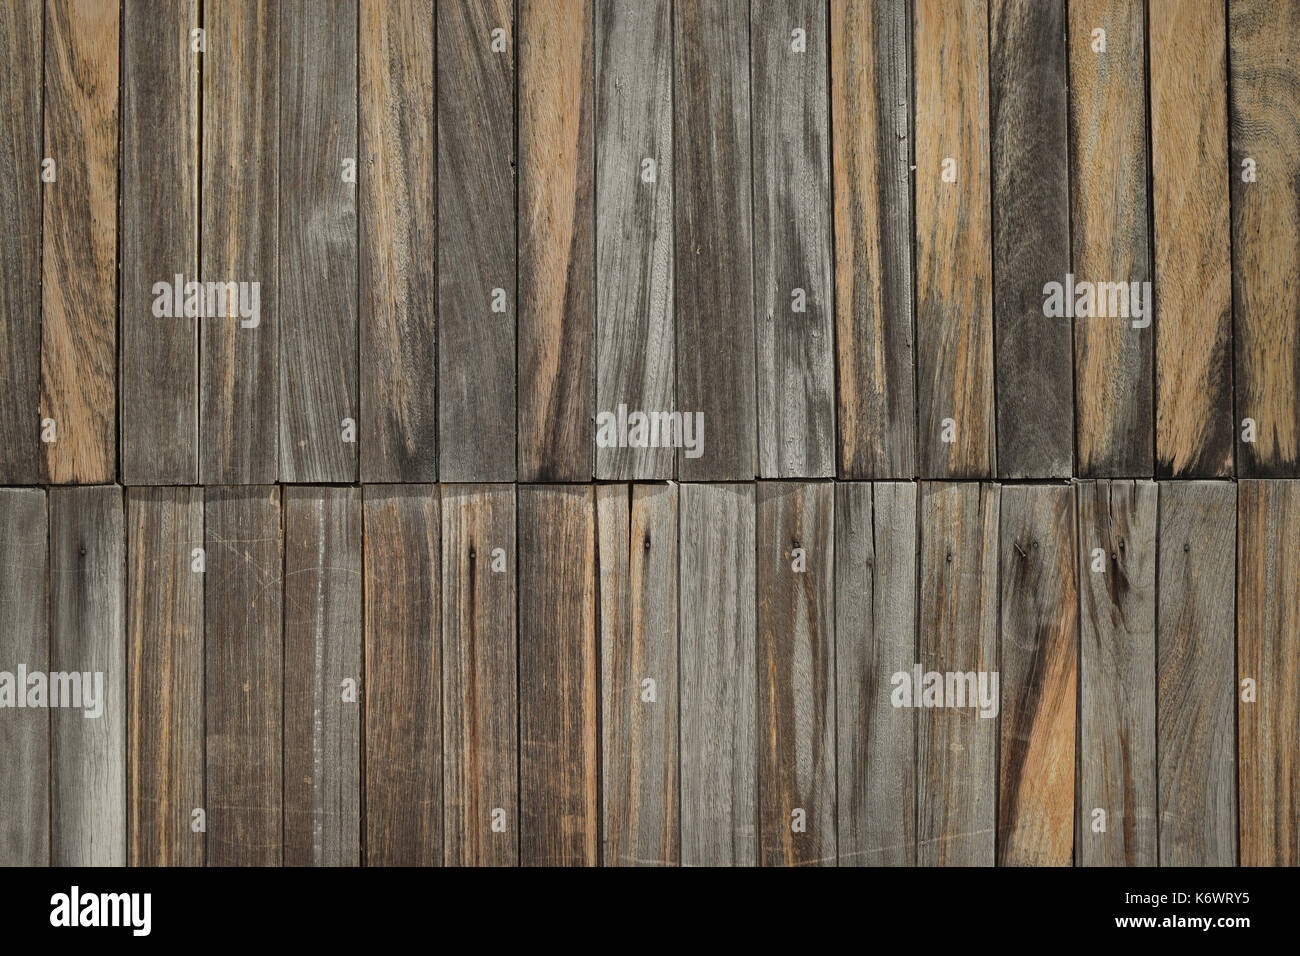 Weathered wooden planks with rusty nails. Wood background texture. Stock Photo